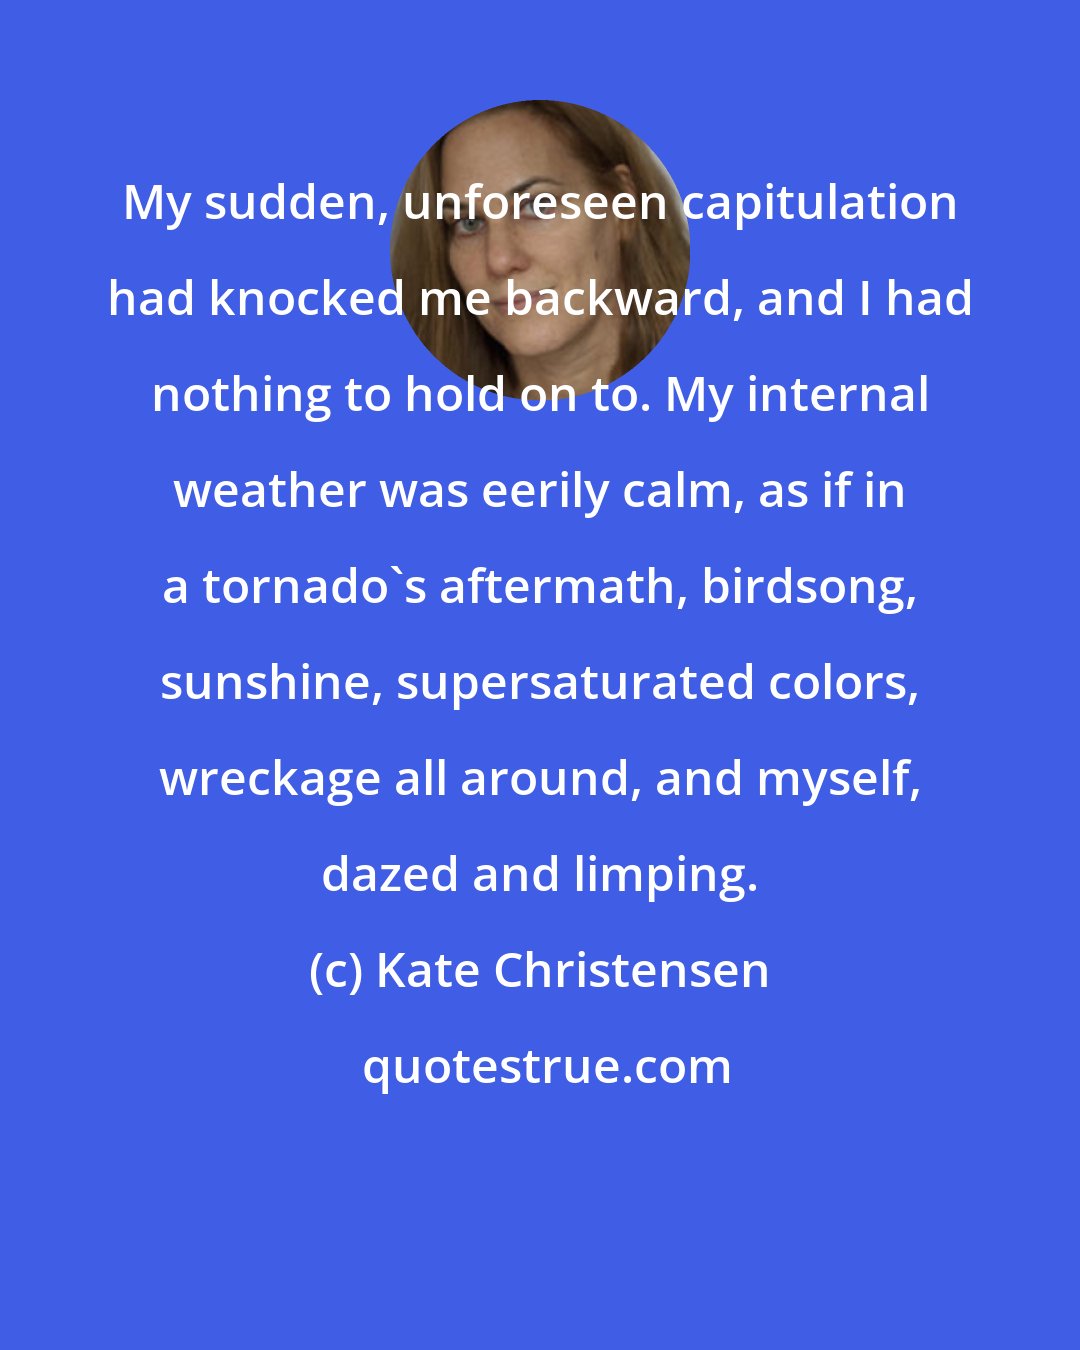 Kate Christensen: My sudden, unforeseen capitulation had knocked me backward, and I had nothing to hold on to. My internal weather was eerily calm, as if in a tornado's aftermath, birdsong, sunshine, supersaturated colors, wreckage all around, and myself, dazed and limping.